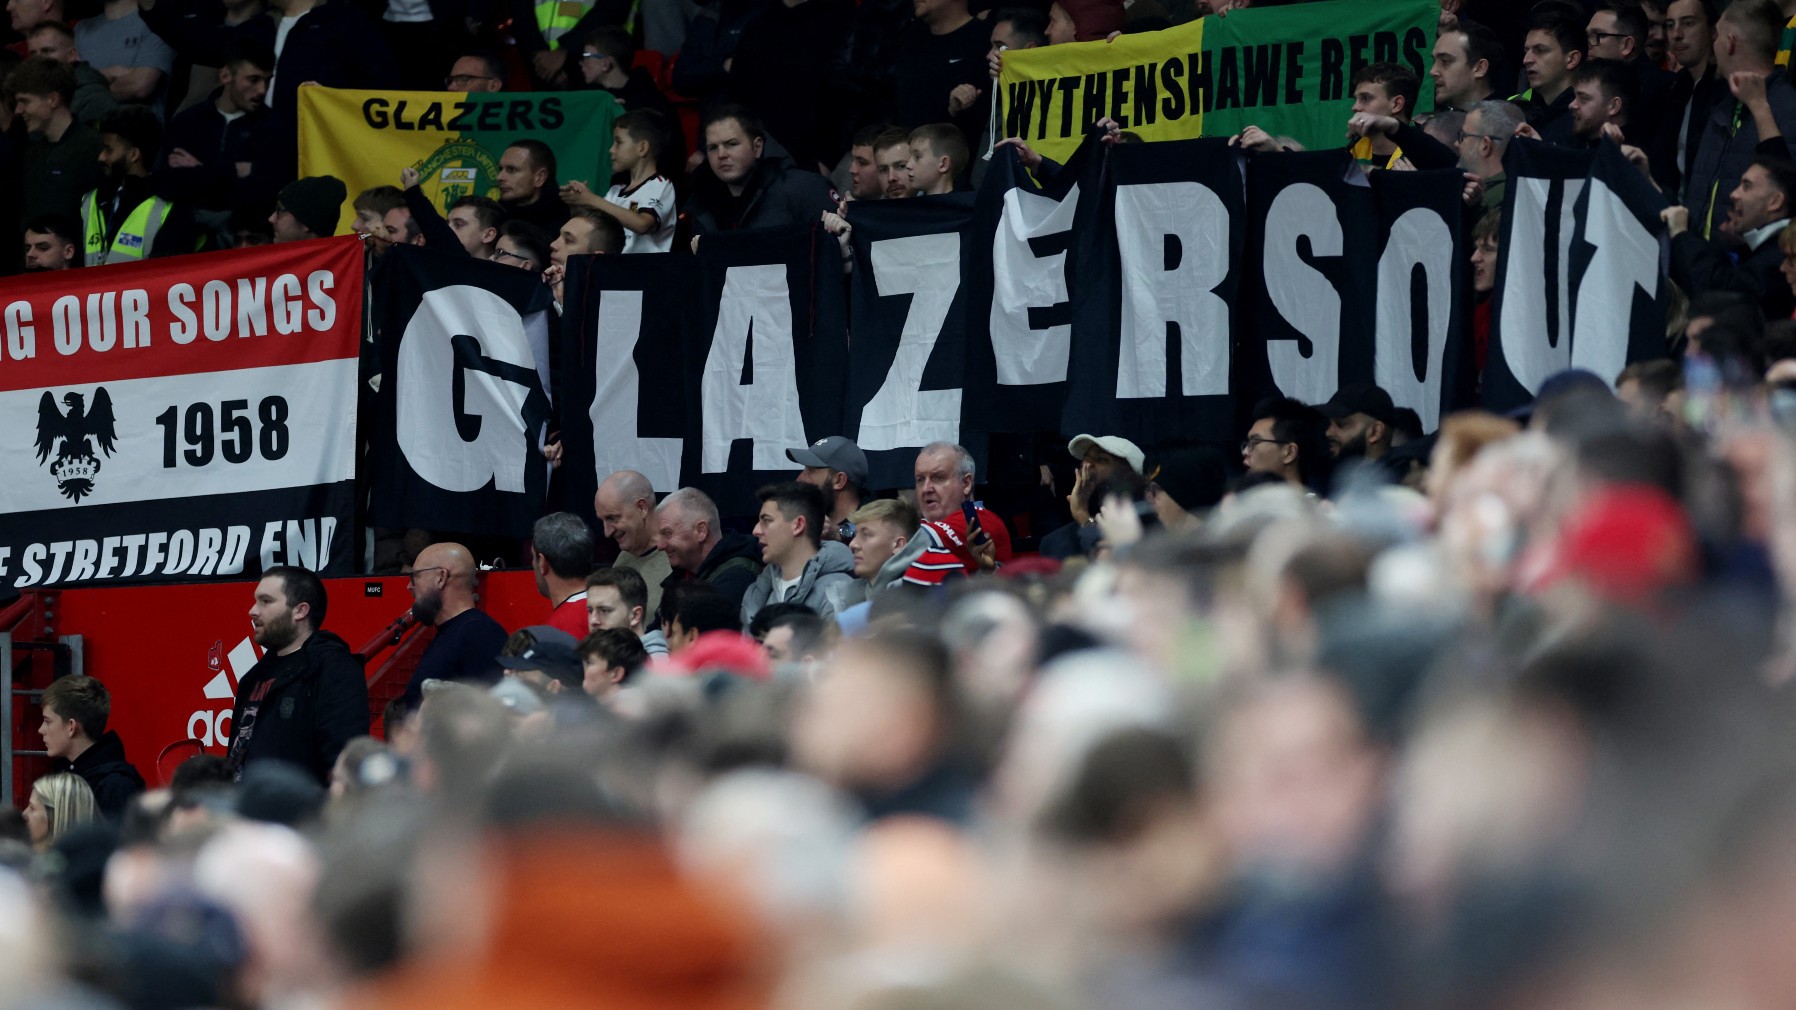 Many fans have been protesting about the Glazers since their takeover in 2005./ Carl Recine/Reuters